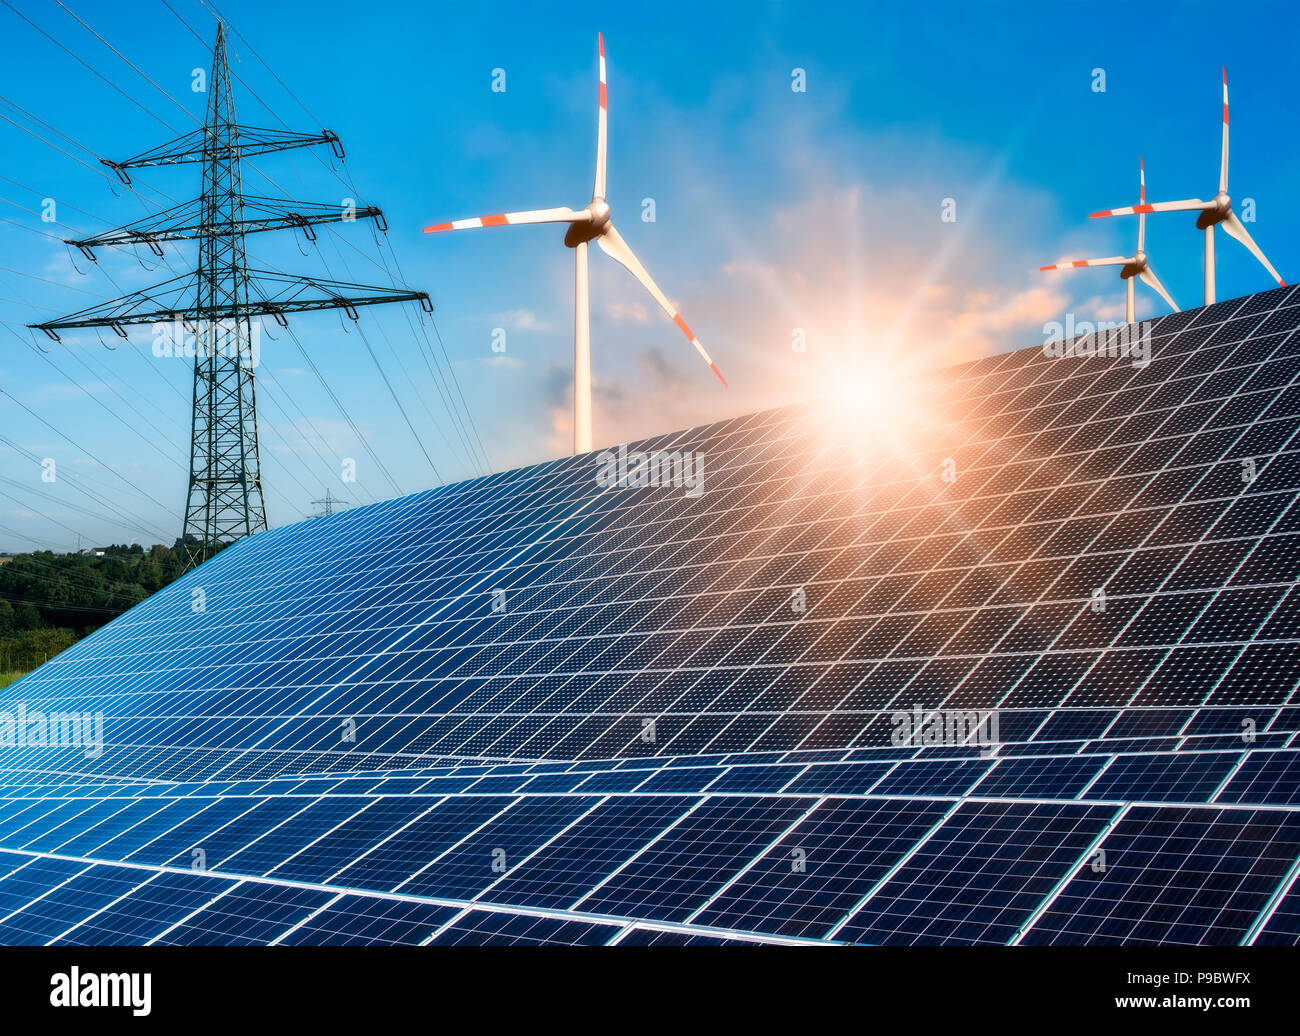 Photovoltaic system, wind turbine and power pole with bright sun Stock Photo